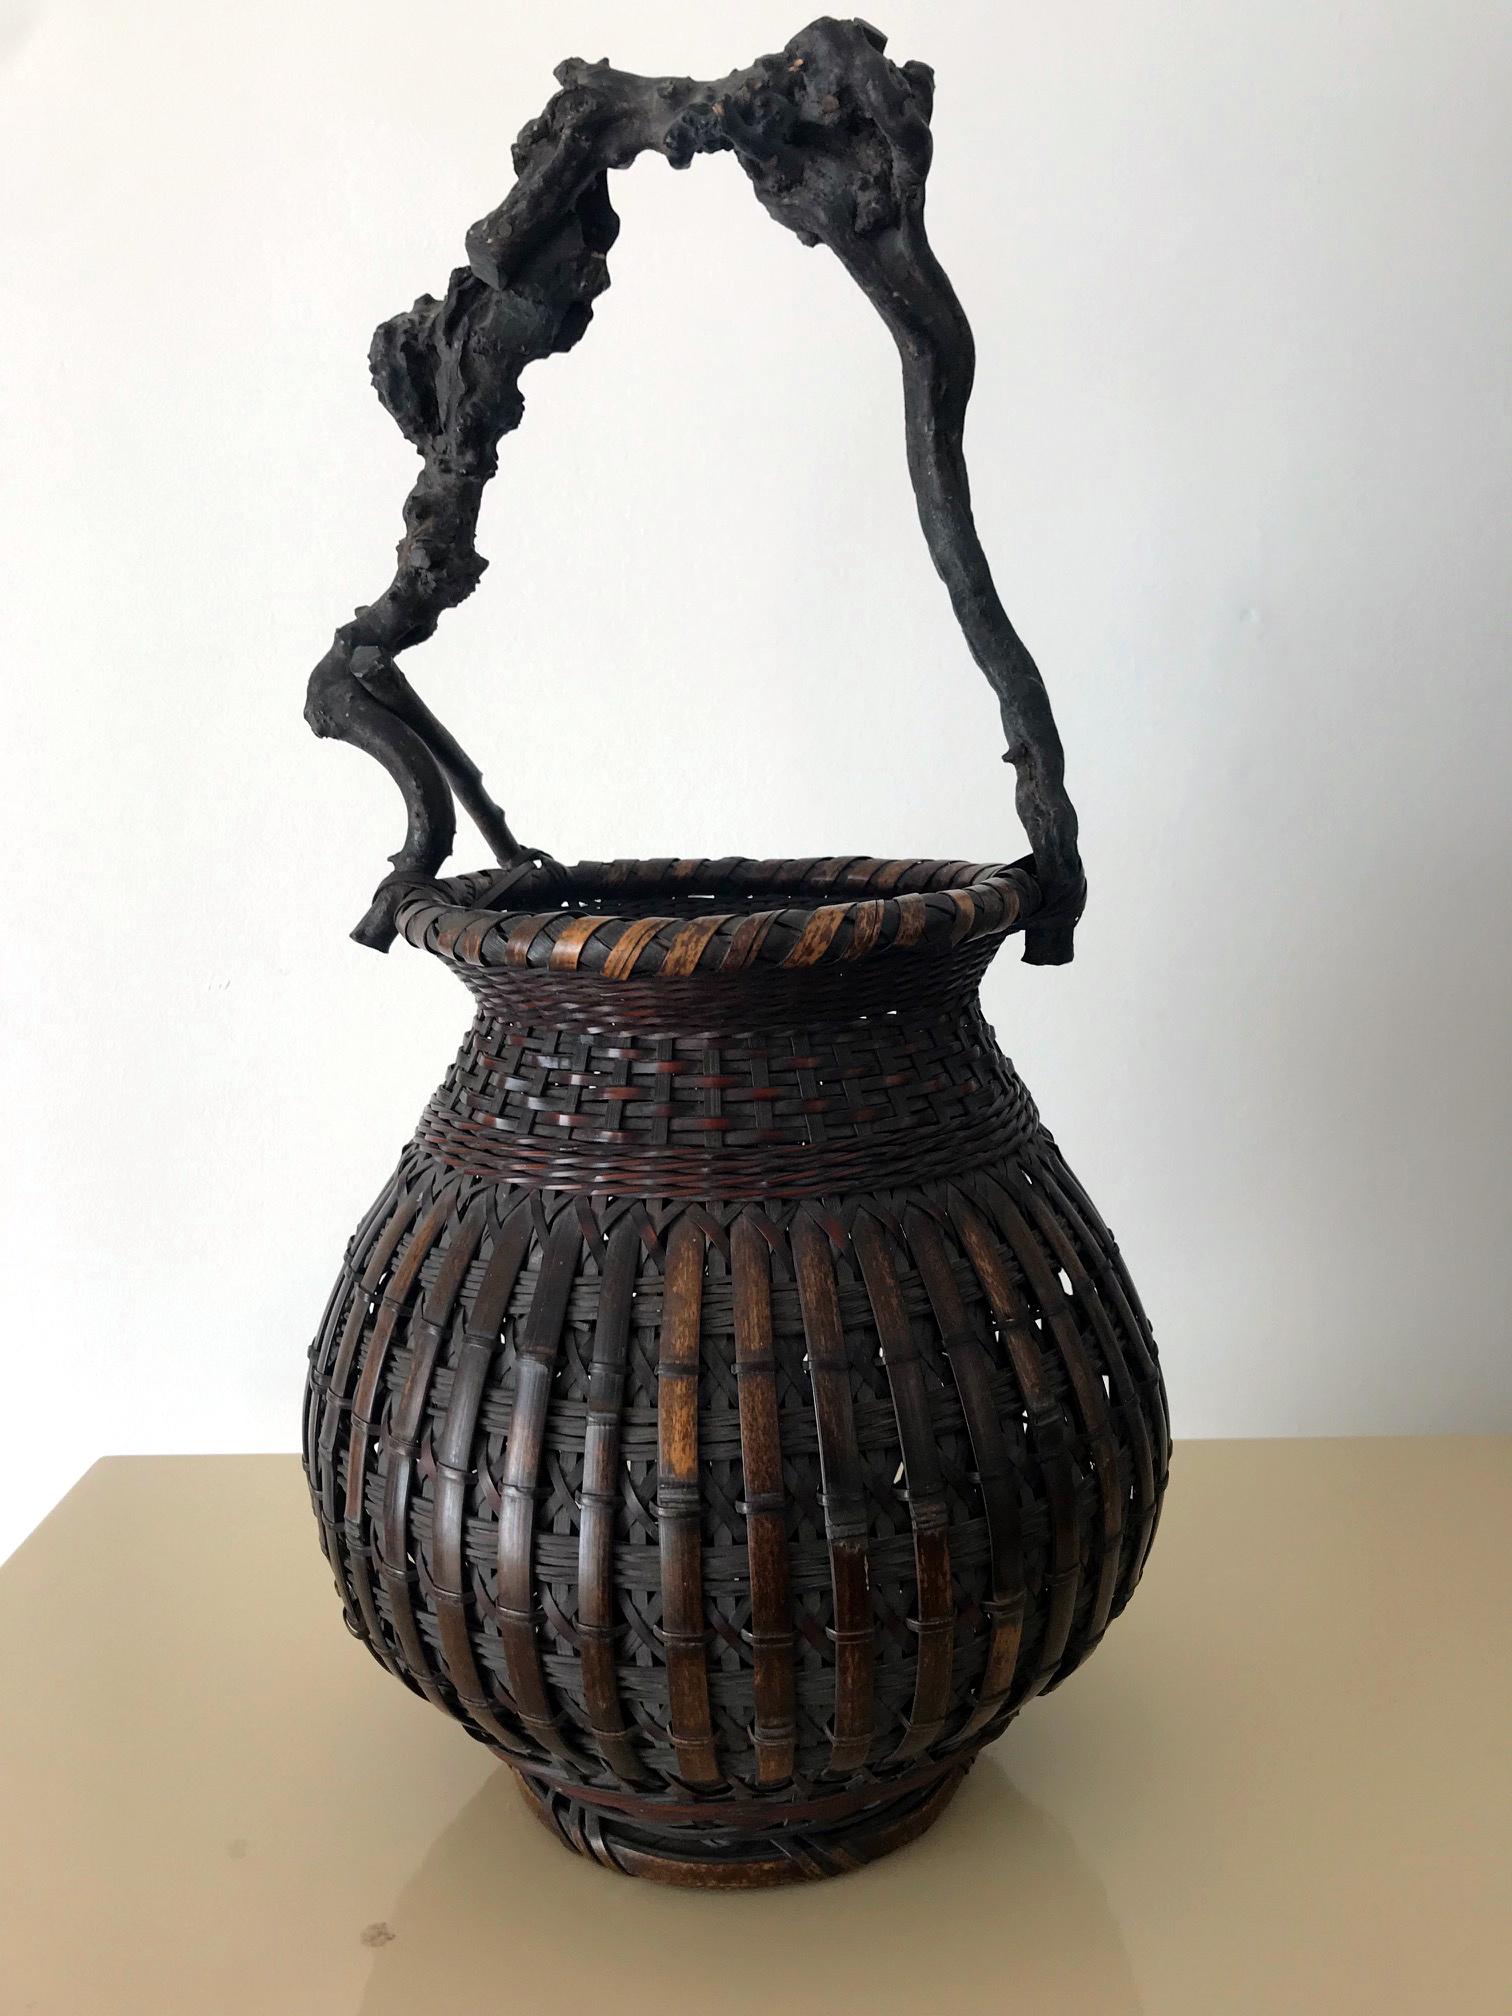 A sculpture of its own right, this antique Japanese bamboo basket from an unknown artist is from the late Meiji Period (1868-1912), likely turn of the 20th century. It features a regal form that derived from the classic Chinese basket but with a